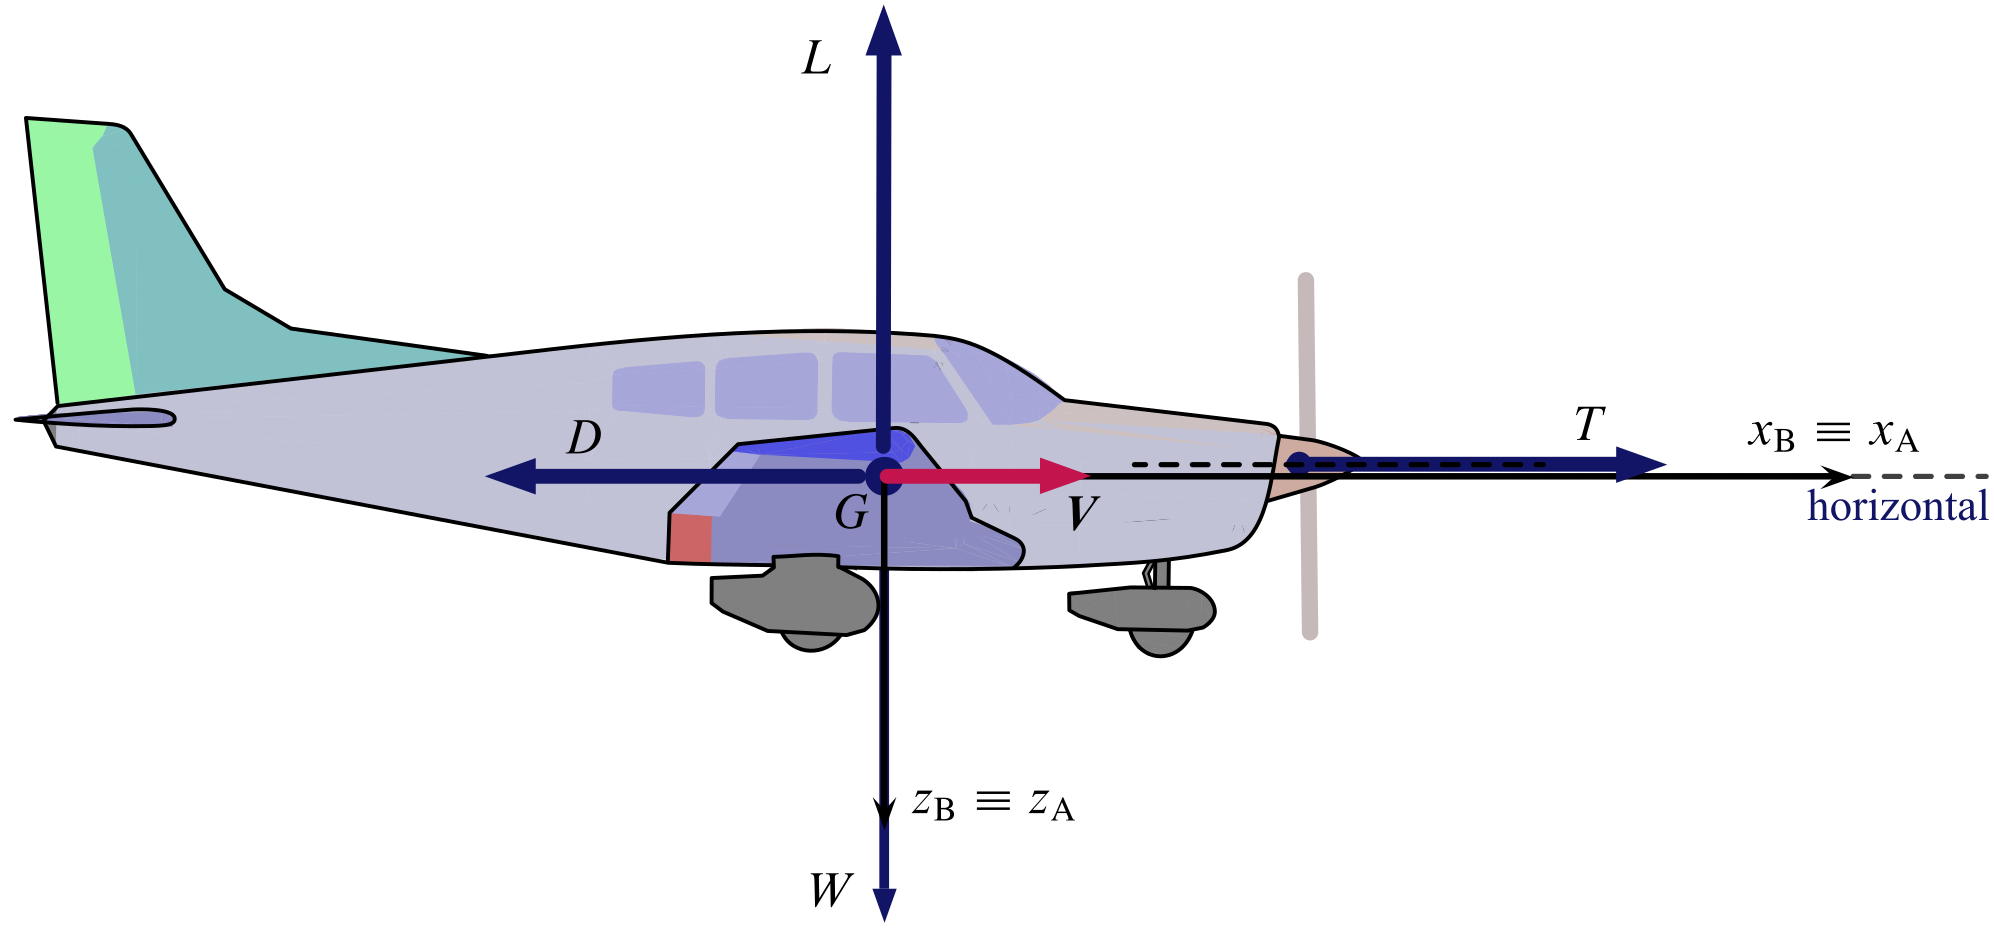 Aircraft in wings level flight on a rectilinear, horizontal trajectory.